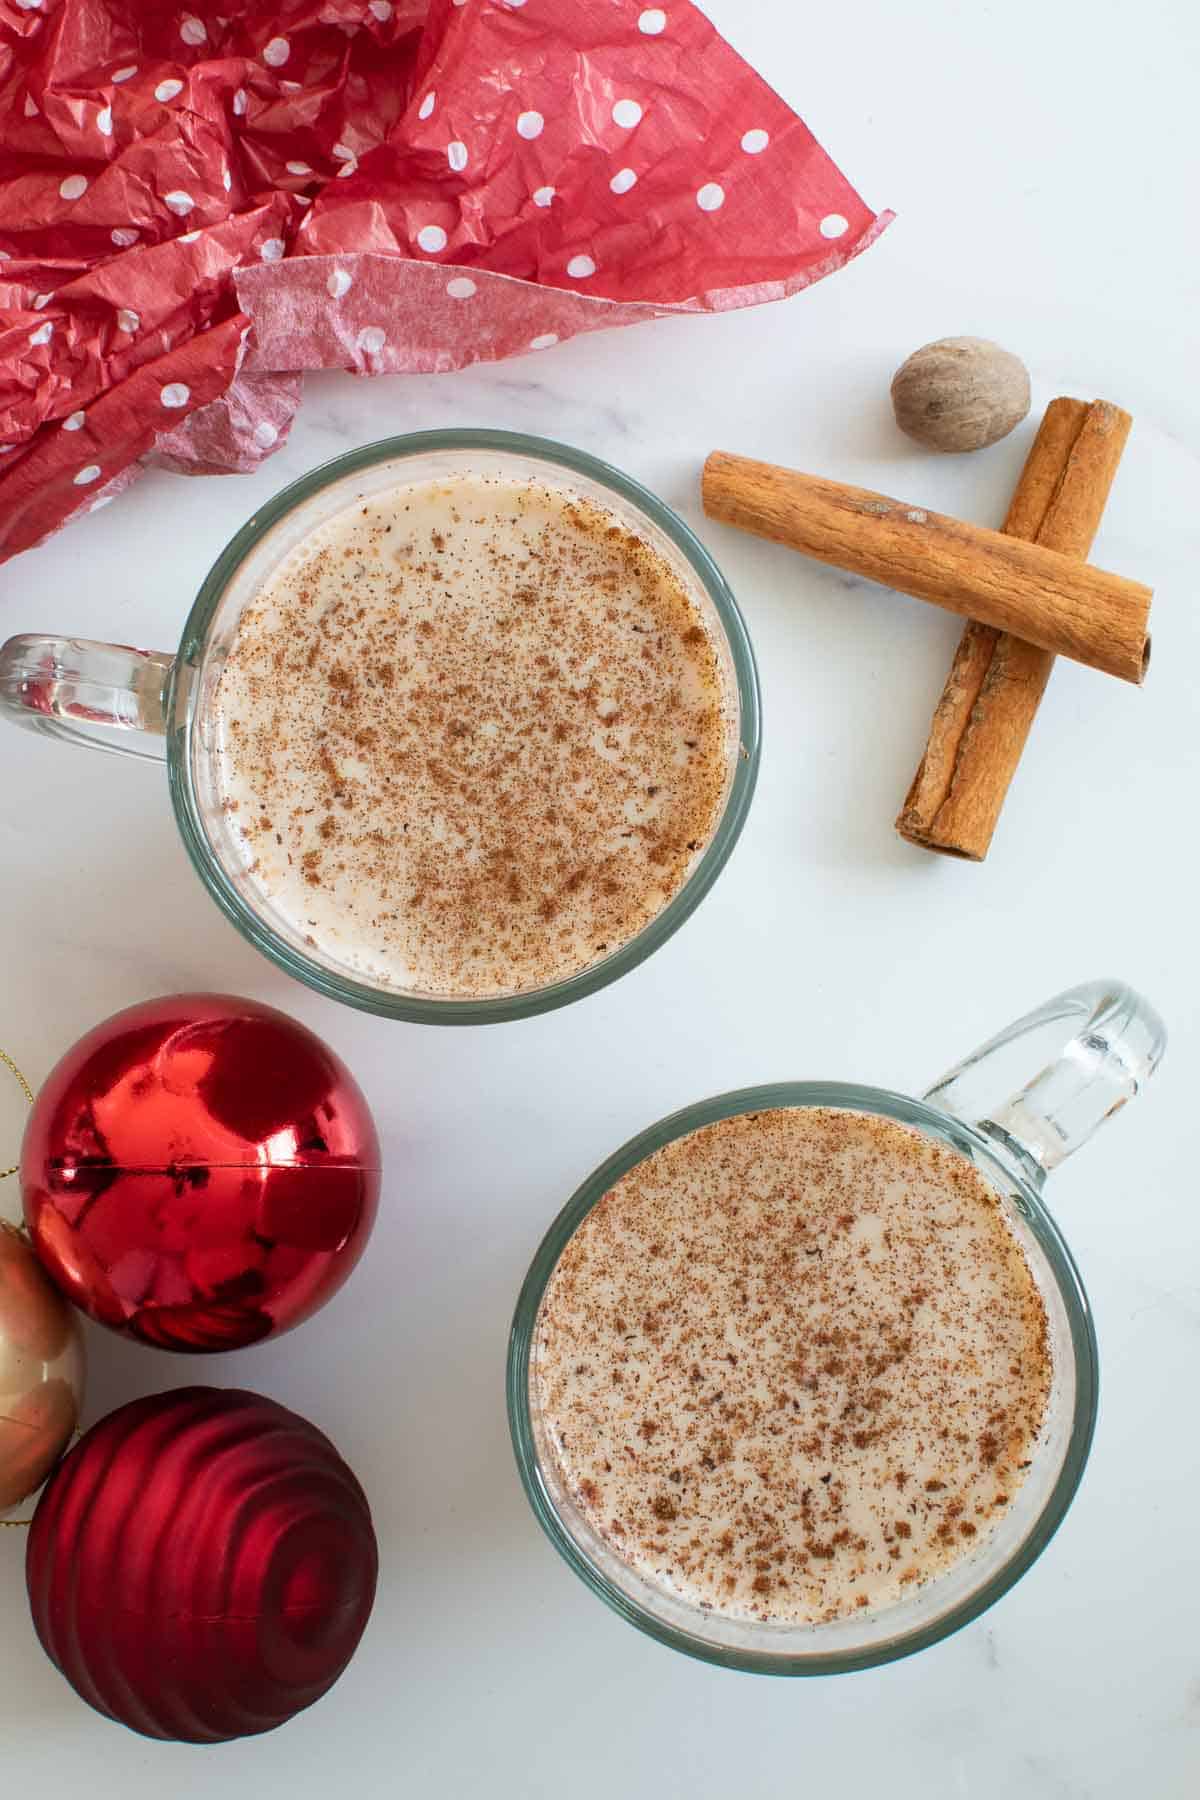 Two cups of eggnog, with Christmas tree decorations and cinnamon sticks on the side.